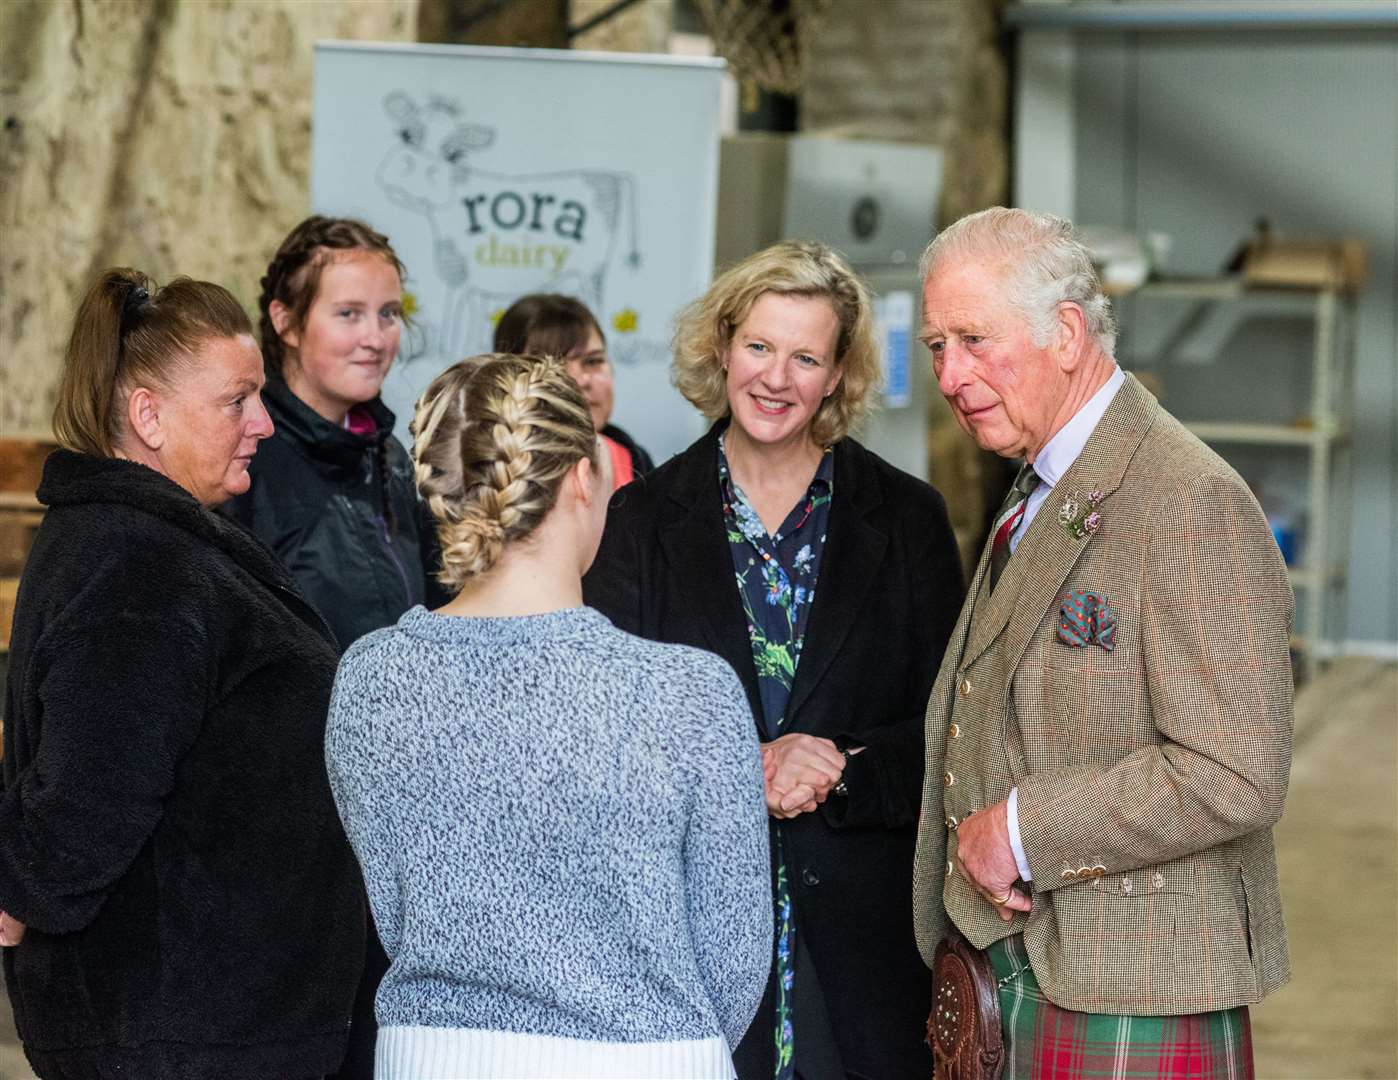 Prince Charles speaks with staff at Rora Dairy.